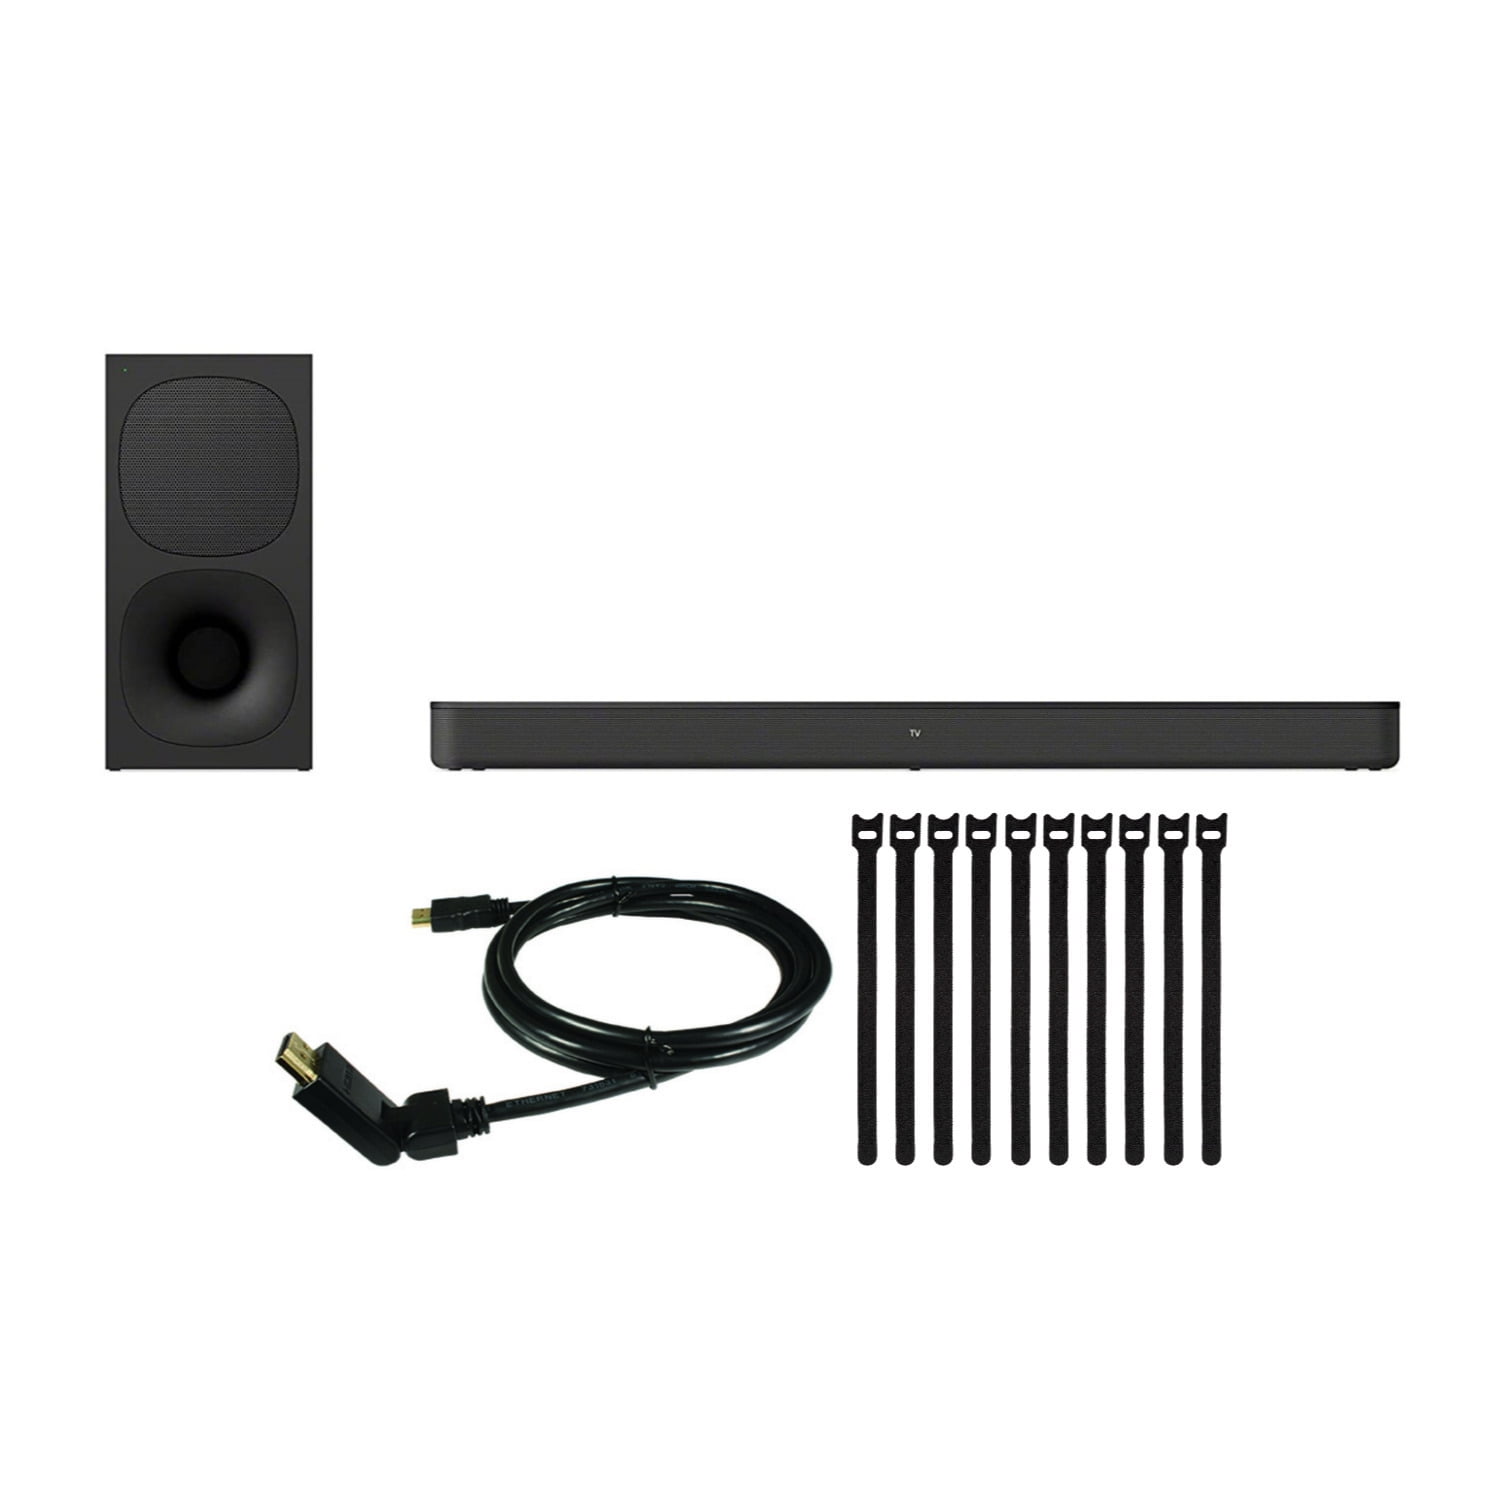 Sony HT-S400 2.1-Channel Soundbar with Subwoofer, HDMI and Focus